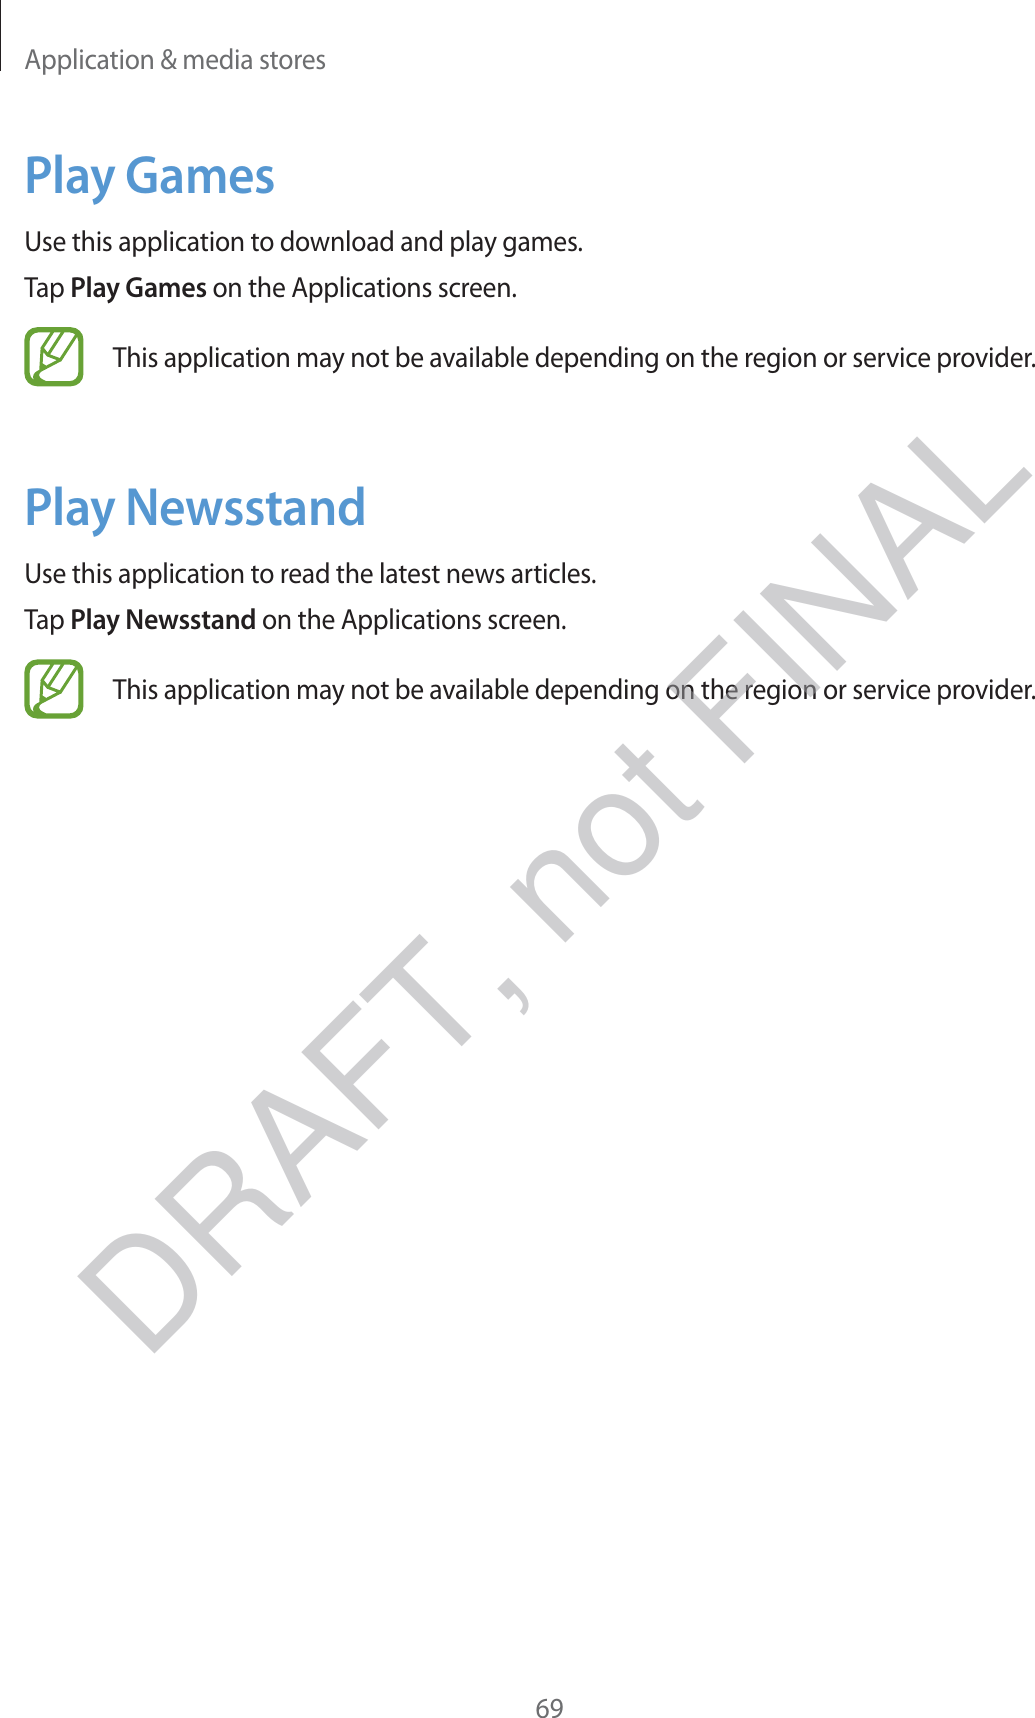 Application &amp; media stores69Play GamesUse this application to download and play games.Tap Play Games on the Applications screen.This application may not be available depending on the region or service provider.Play NewsstandUse this application to read the latest news articles.Tap Play Newsstand on the Applications screen.This application may not be available depending on the region or service provider.DRAFT, not FINAL